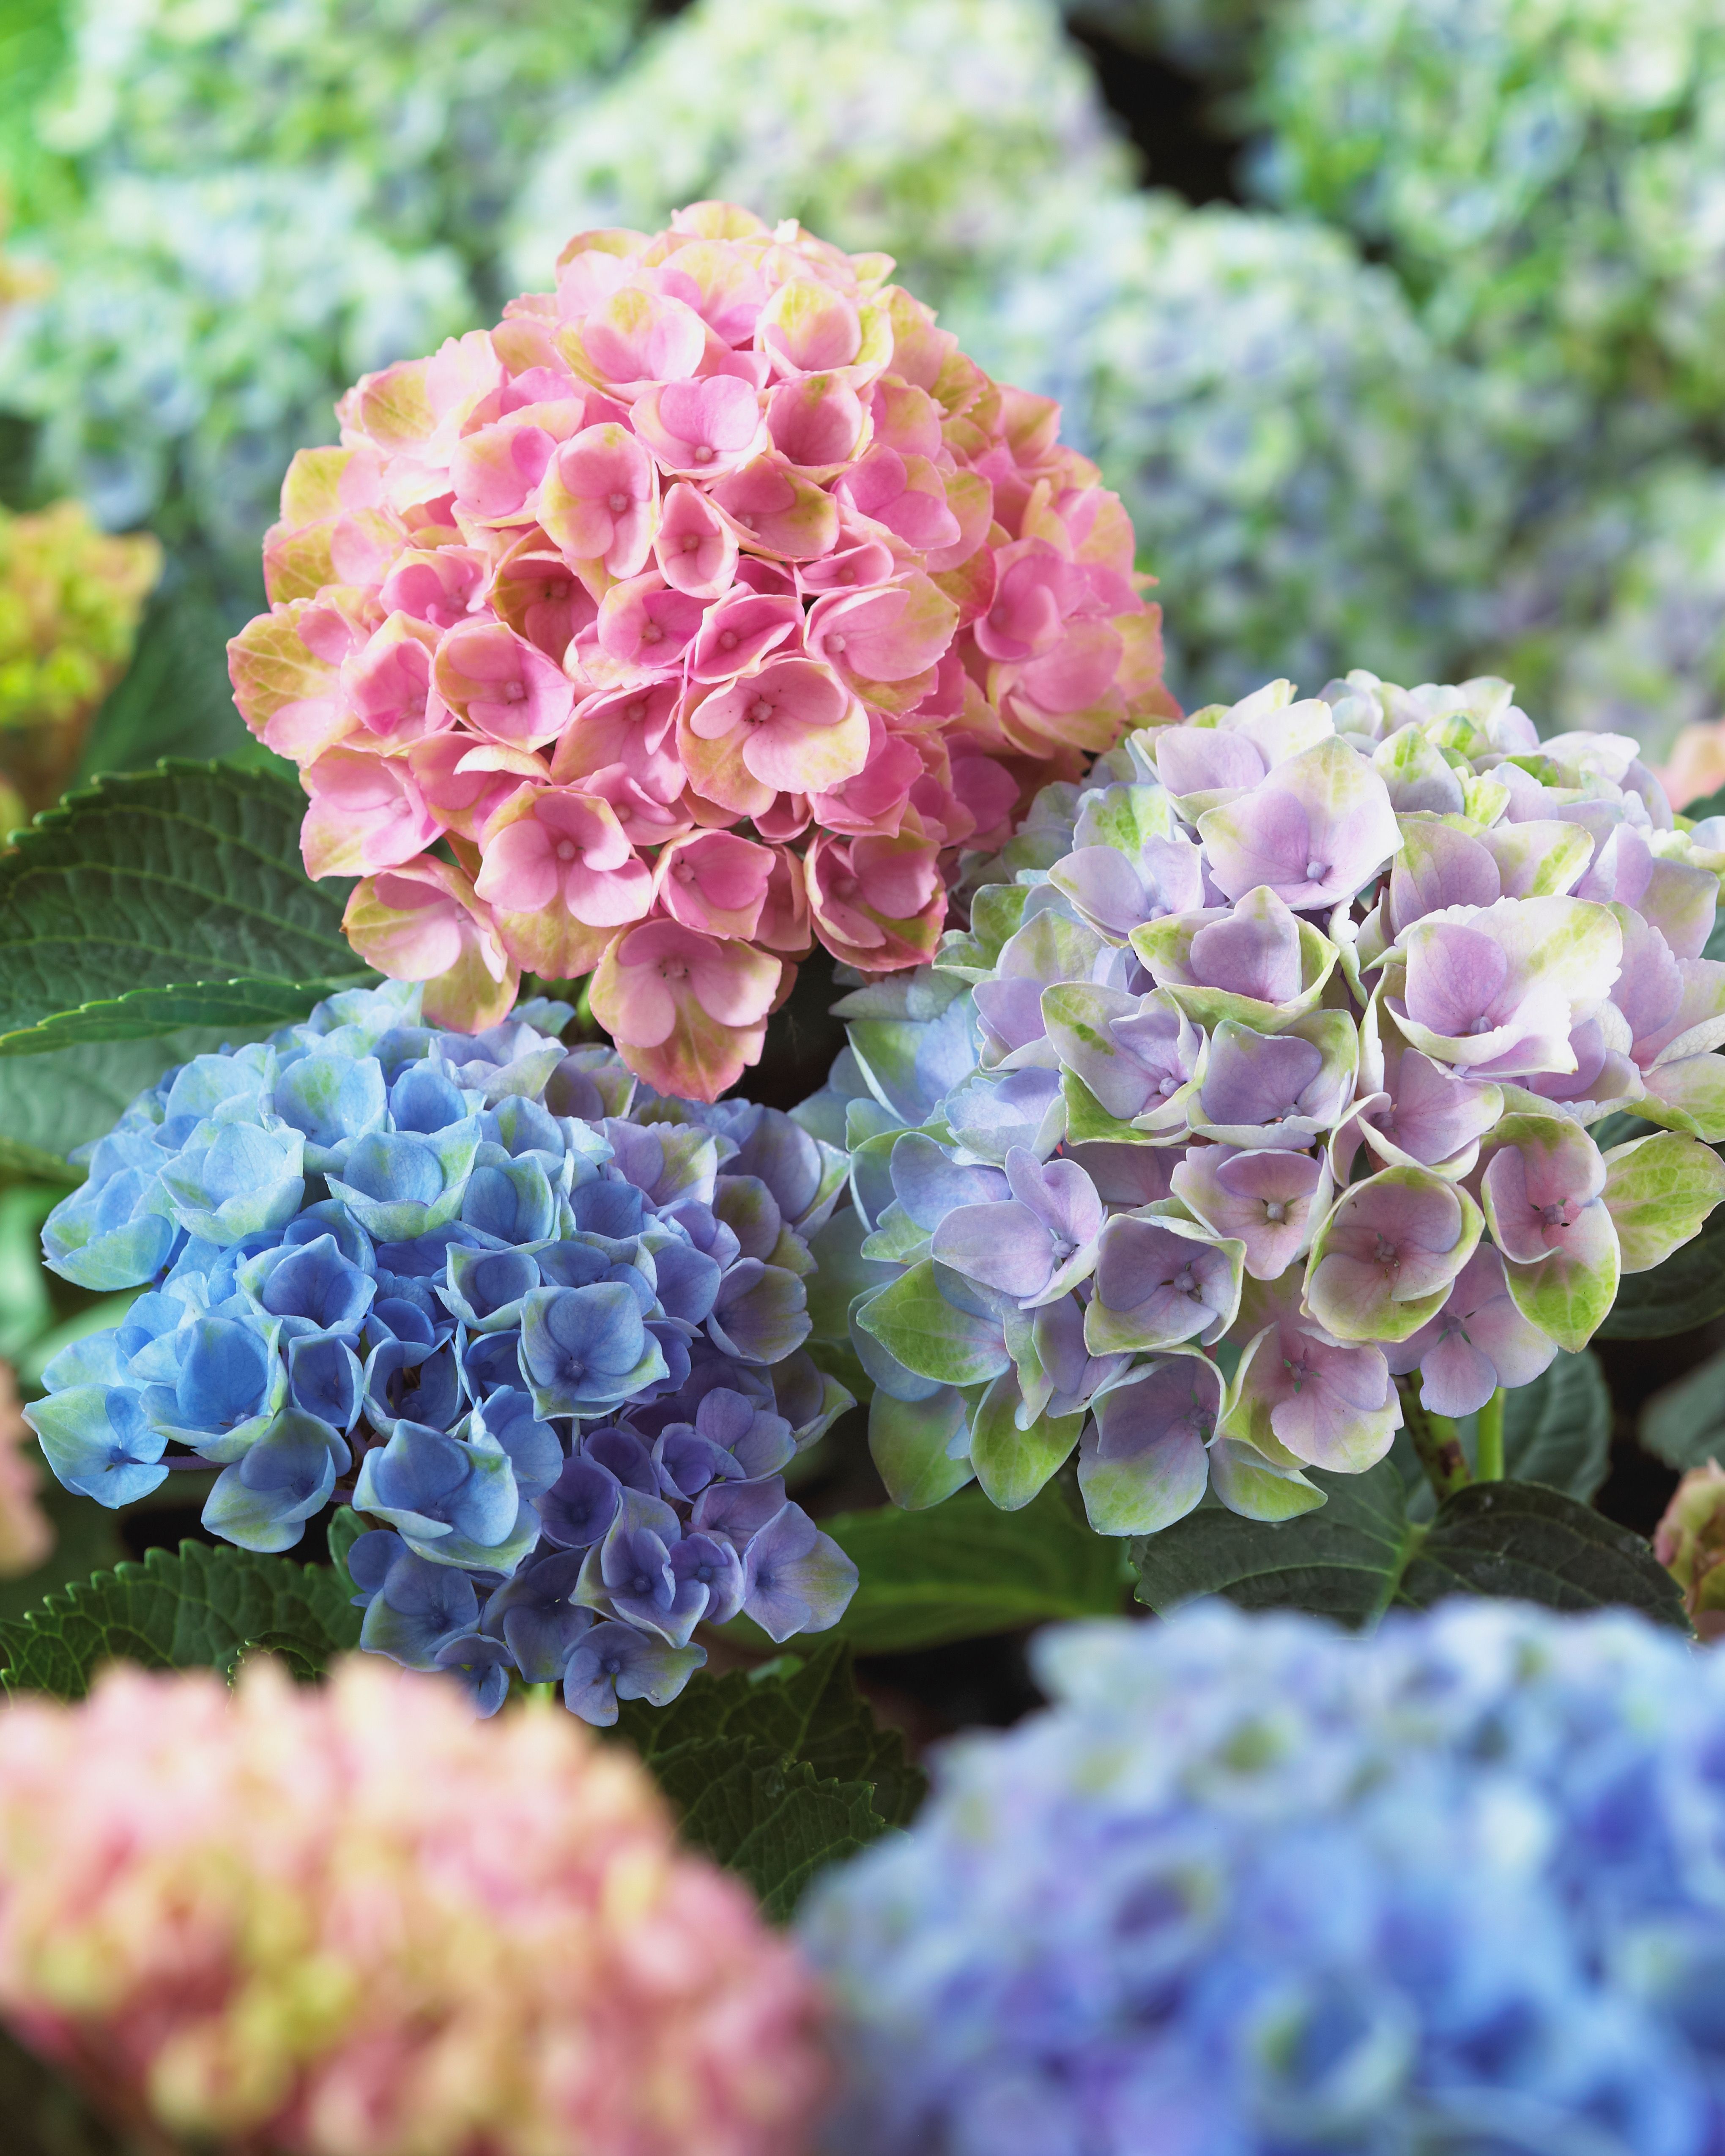 images/plants/hydrangea/hyd-magical-everlasting-revolution/hyd-magical-everlasting-revolution-0126.jpg